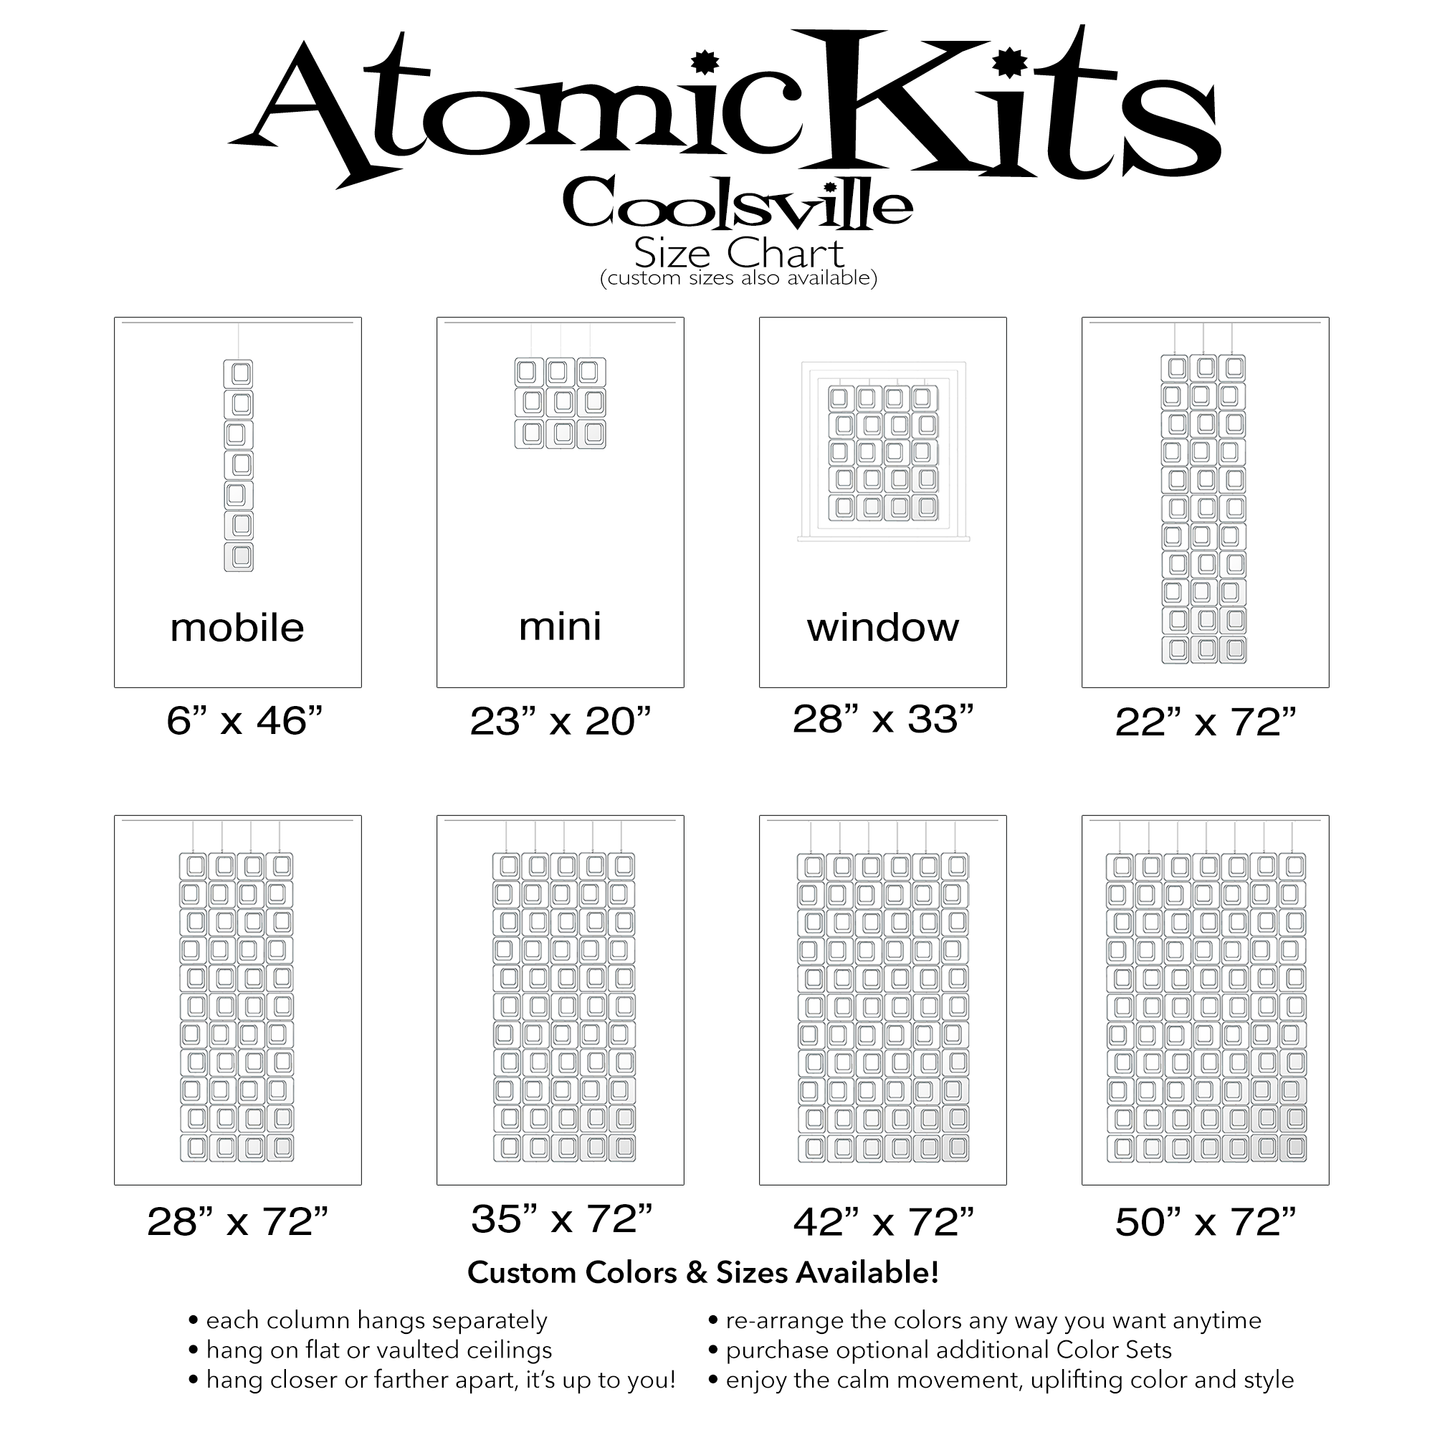 Size Chart for Coolsville in Clear Acrylic Colors for Room Dividers, Curtains, Mobiles, and Wall Art DIY KIT by AtomicMobiles.com